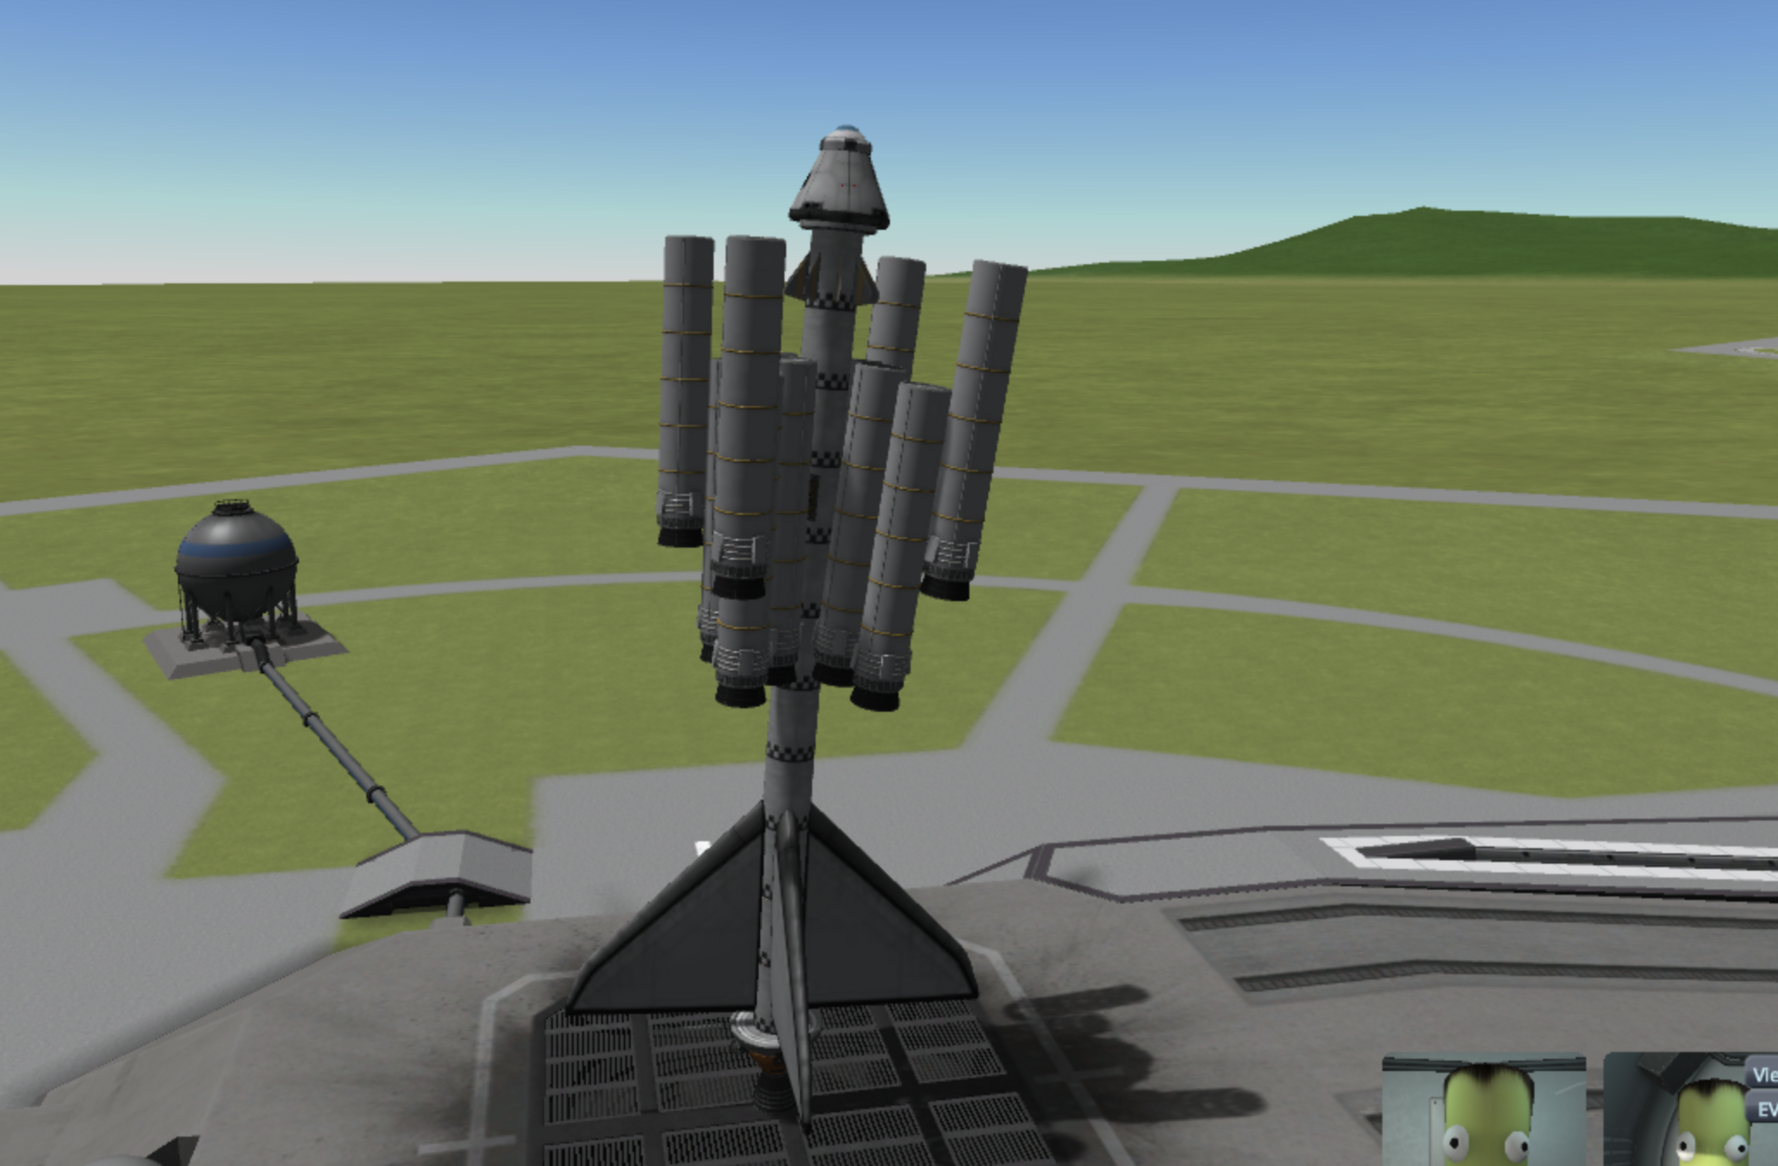 Kerbal Space Program screen grab - a ridiculous rocket overloaded with solid fuel boosters that wobbles around, crashes spectacularly, and gets all flamey